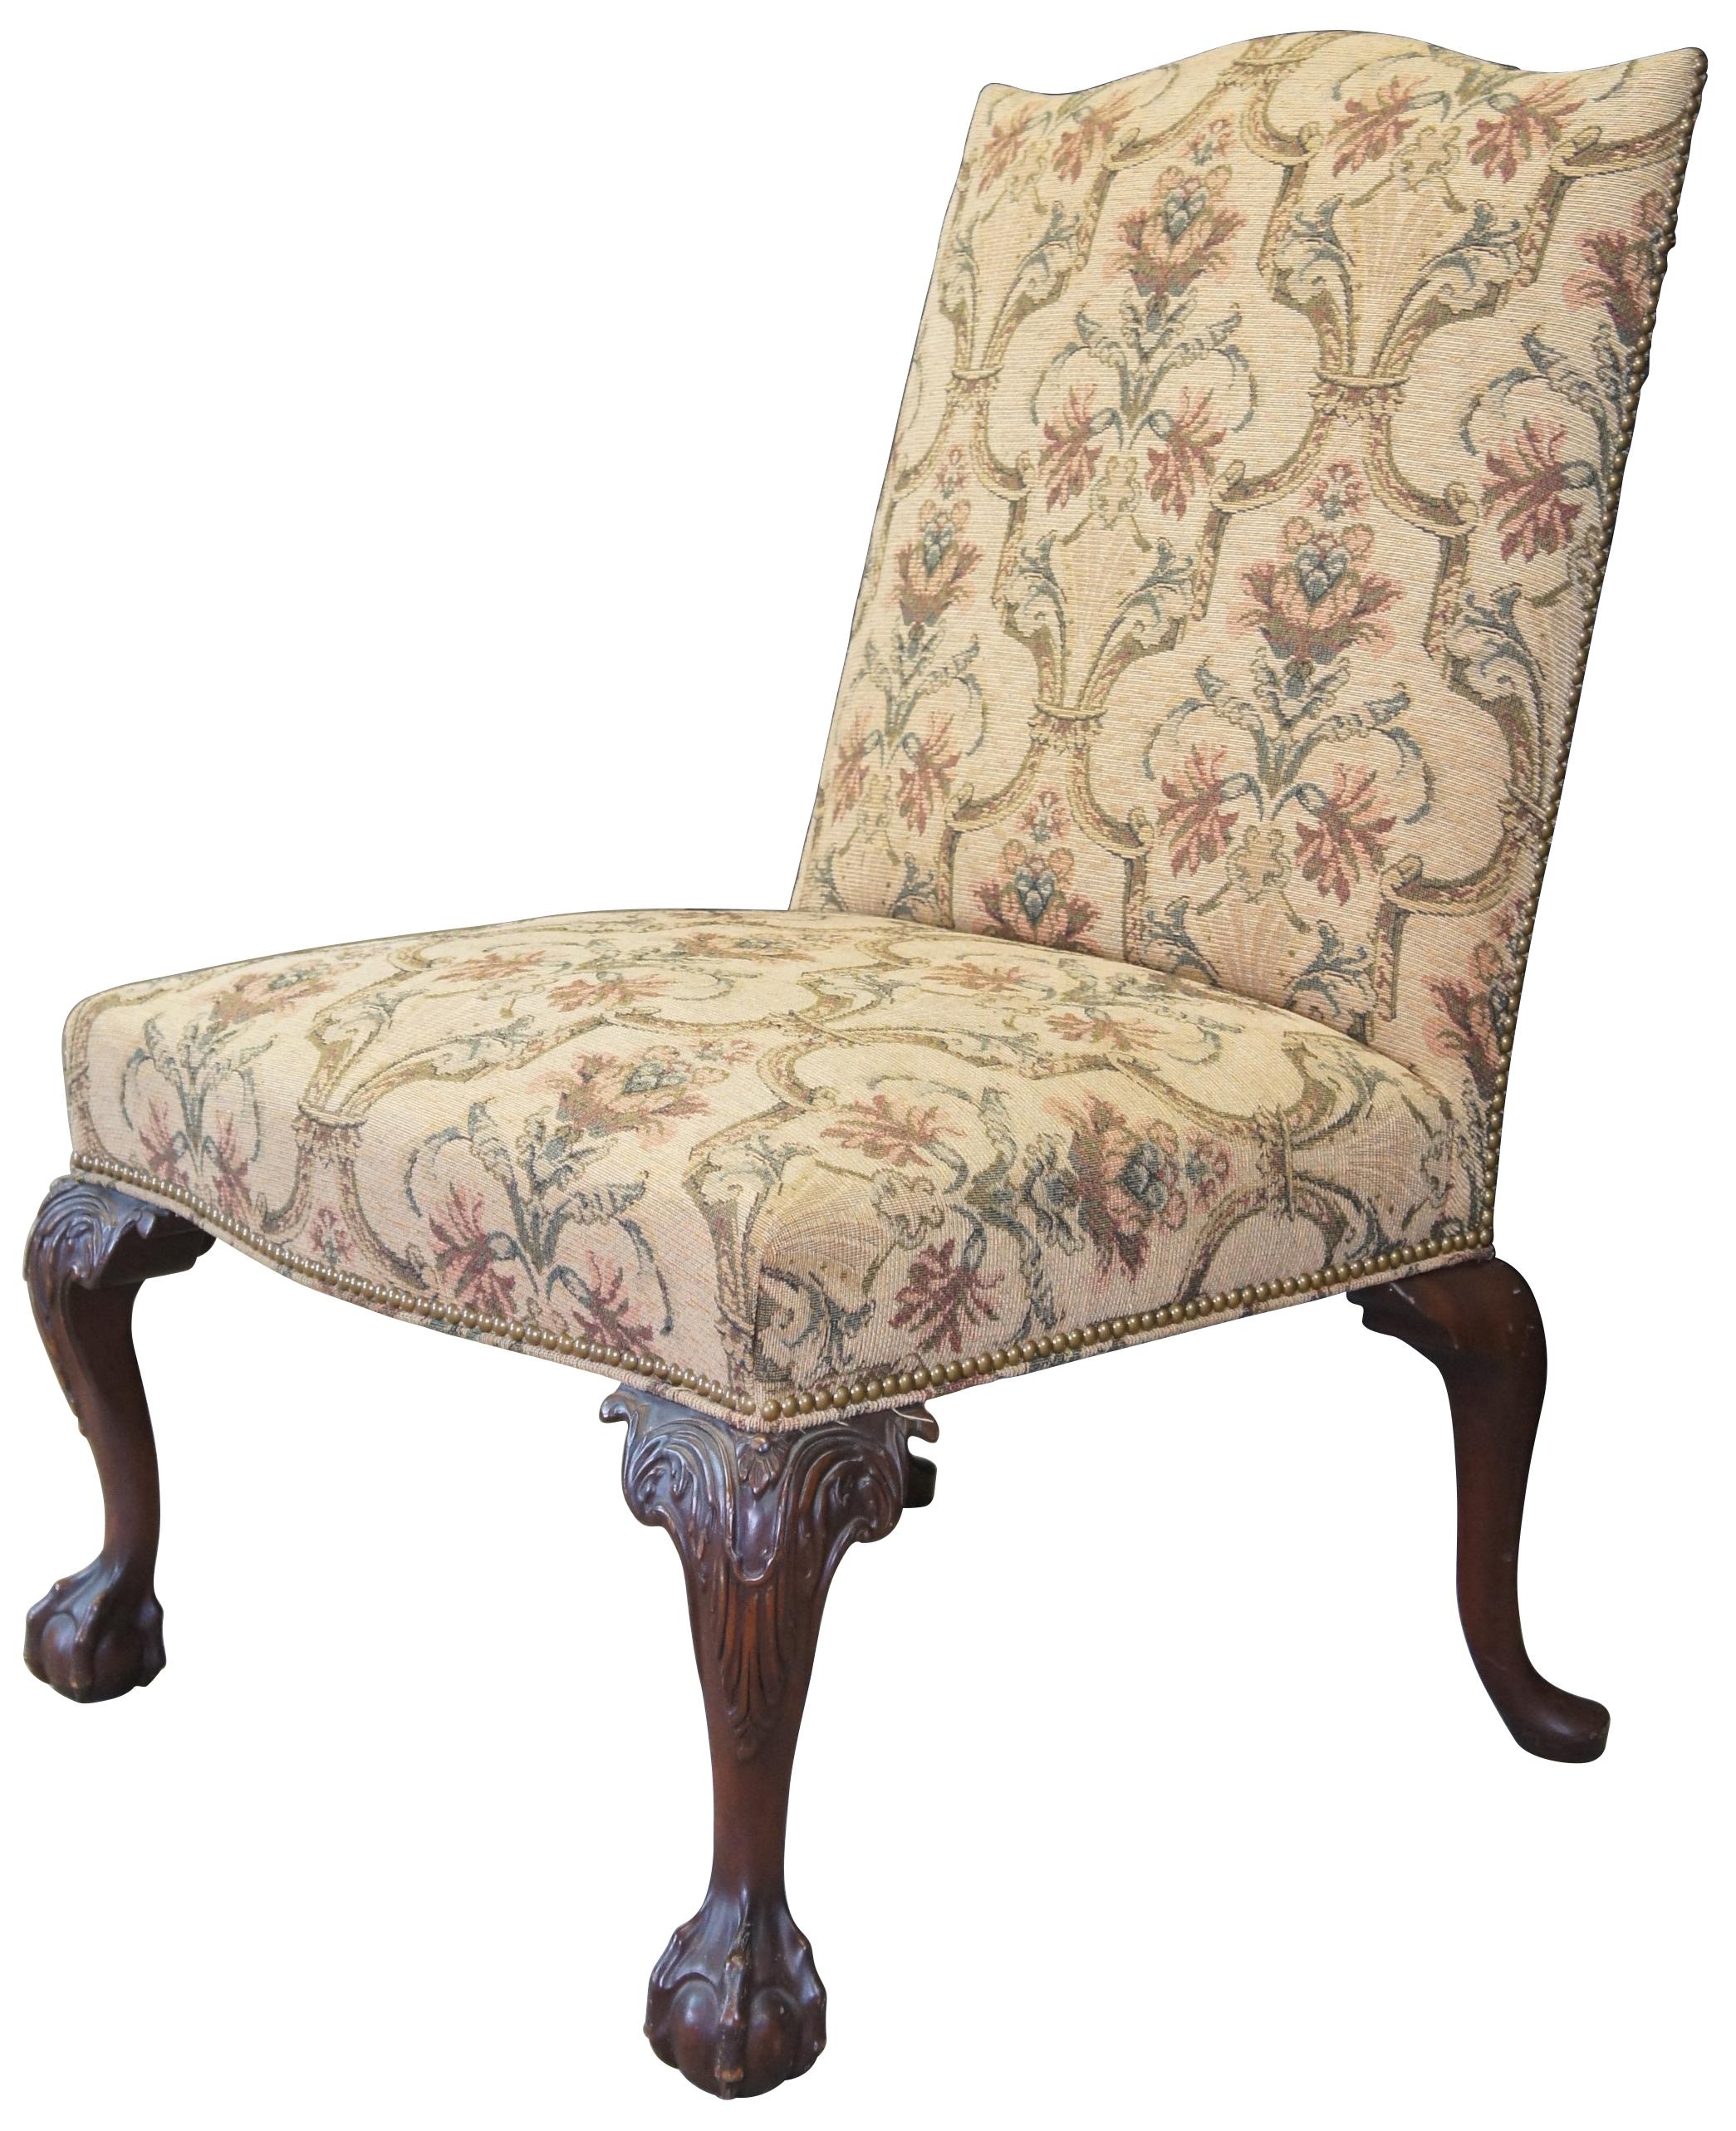 An impressive 20th century George II style library chair. Made from mahogany with a French brocade fabric. Features a camelback seat crest and cabriole legs, acanthus carved along the knee terminating into a ball and claw along the front and pad